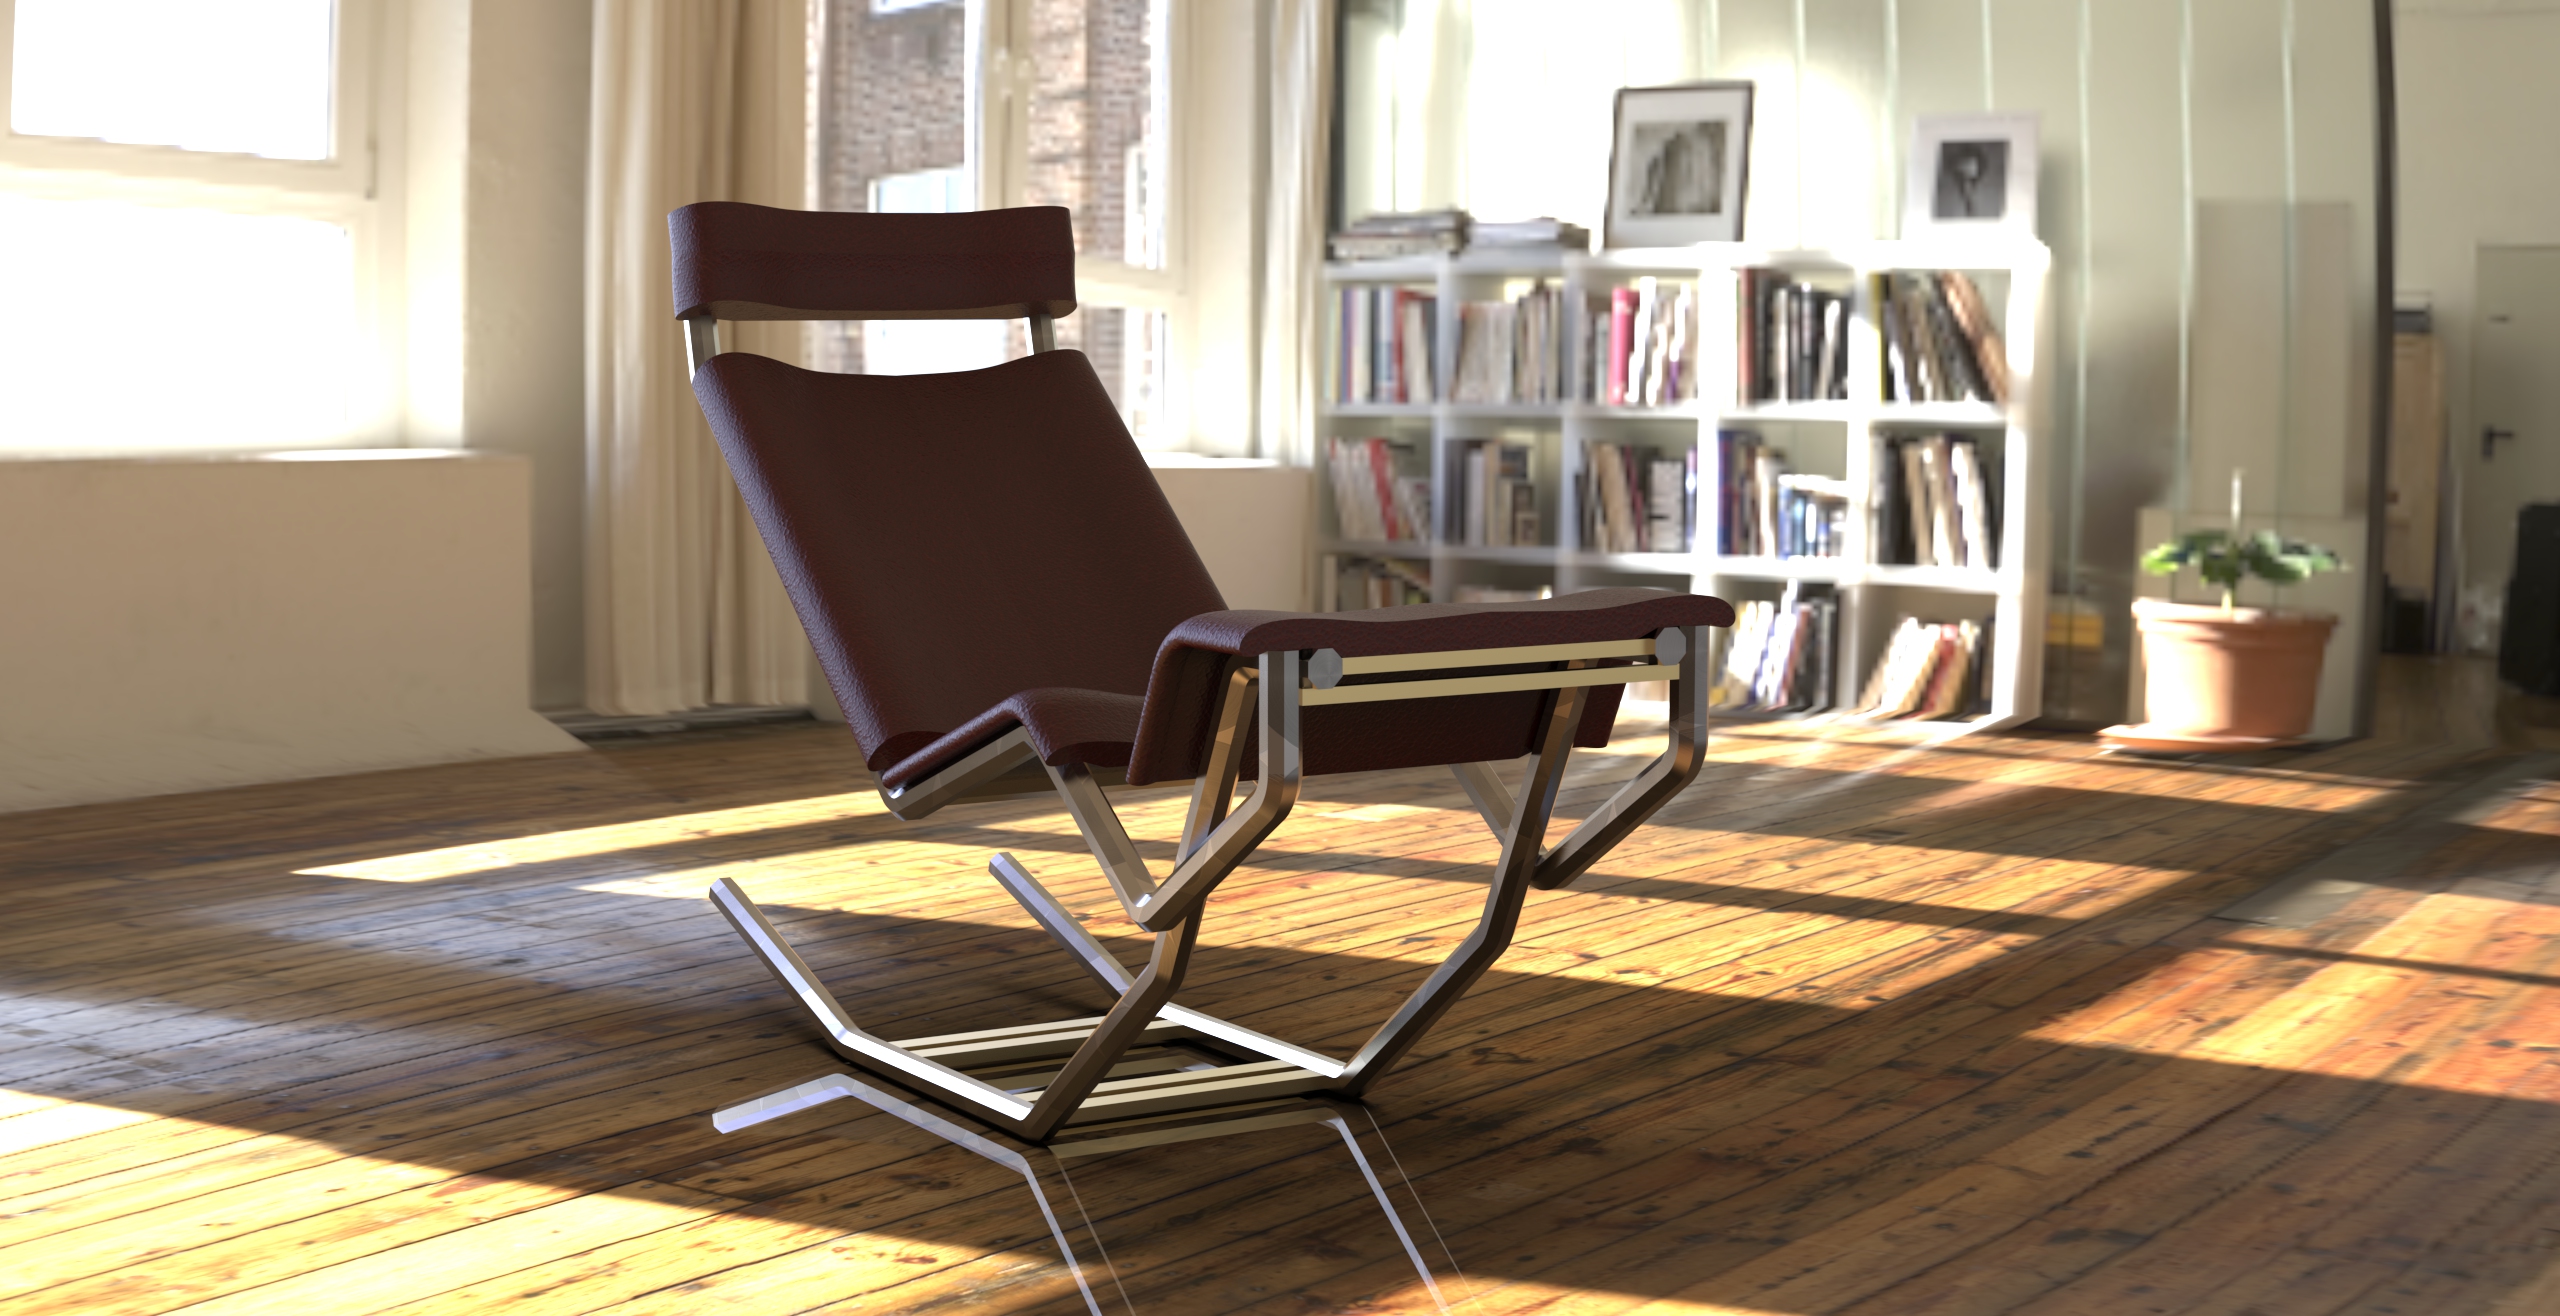 image of completed CAD chair render in environment